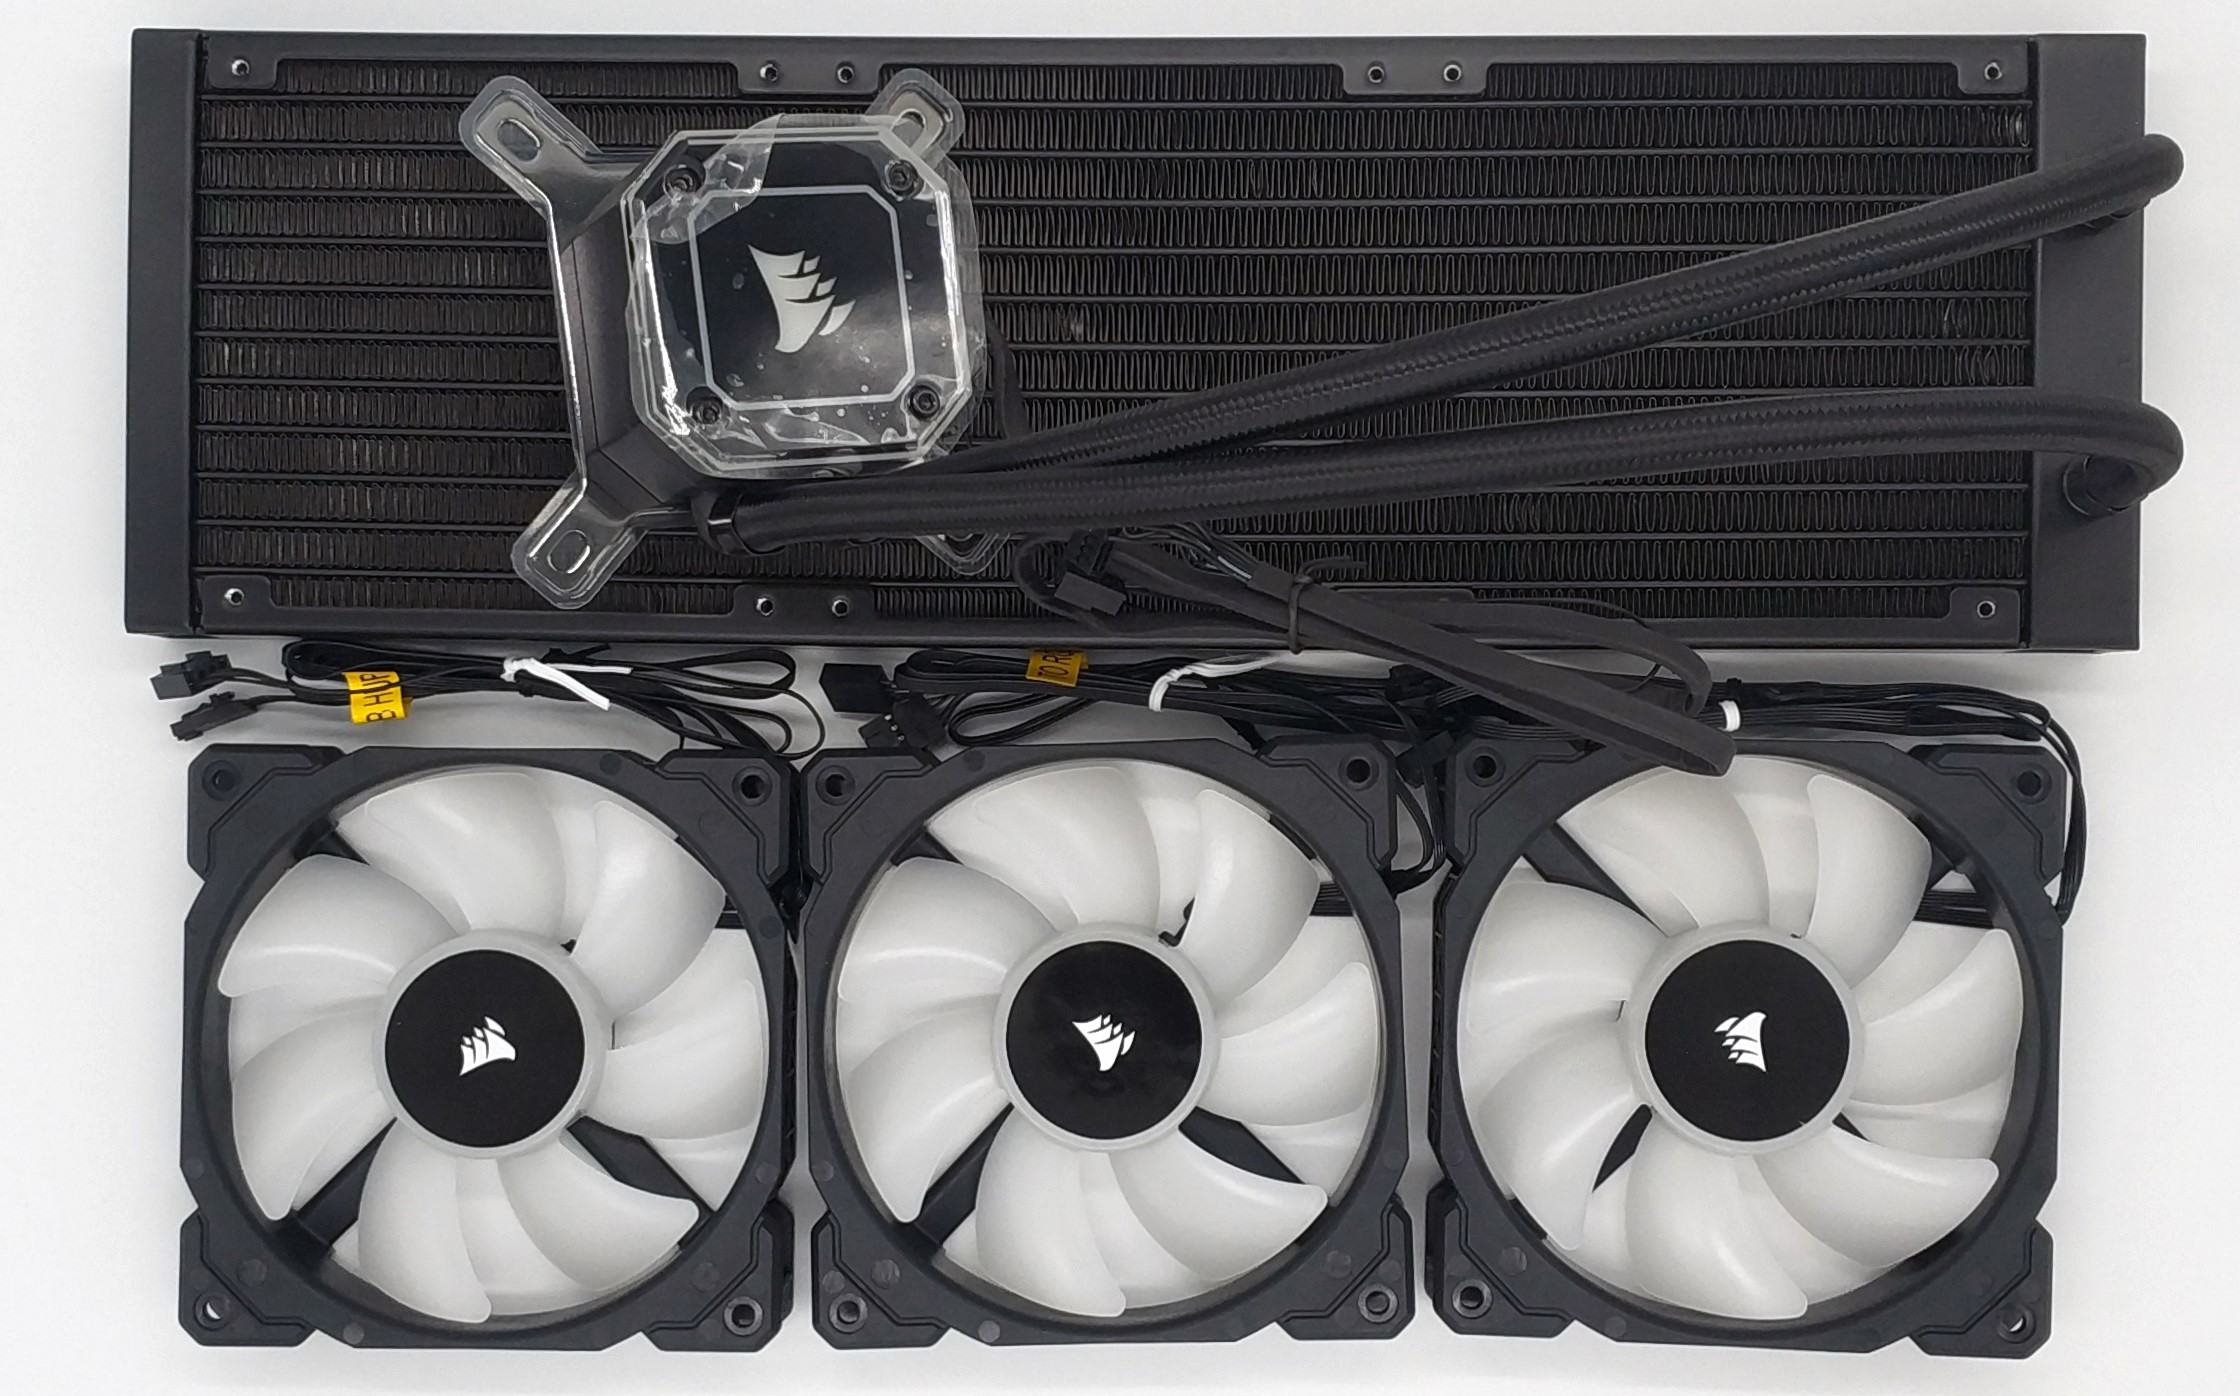 Corsair H150i ELITE CAPELLIX review - Powerful cooling with Next-Gen RGB